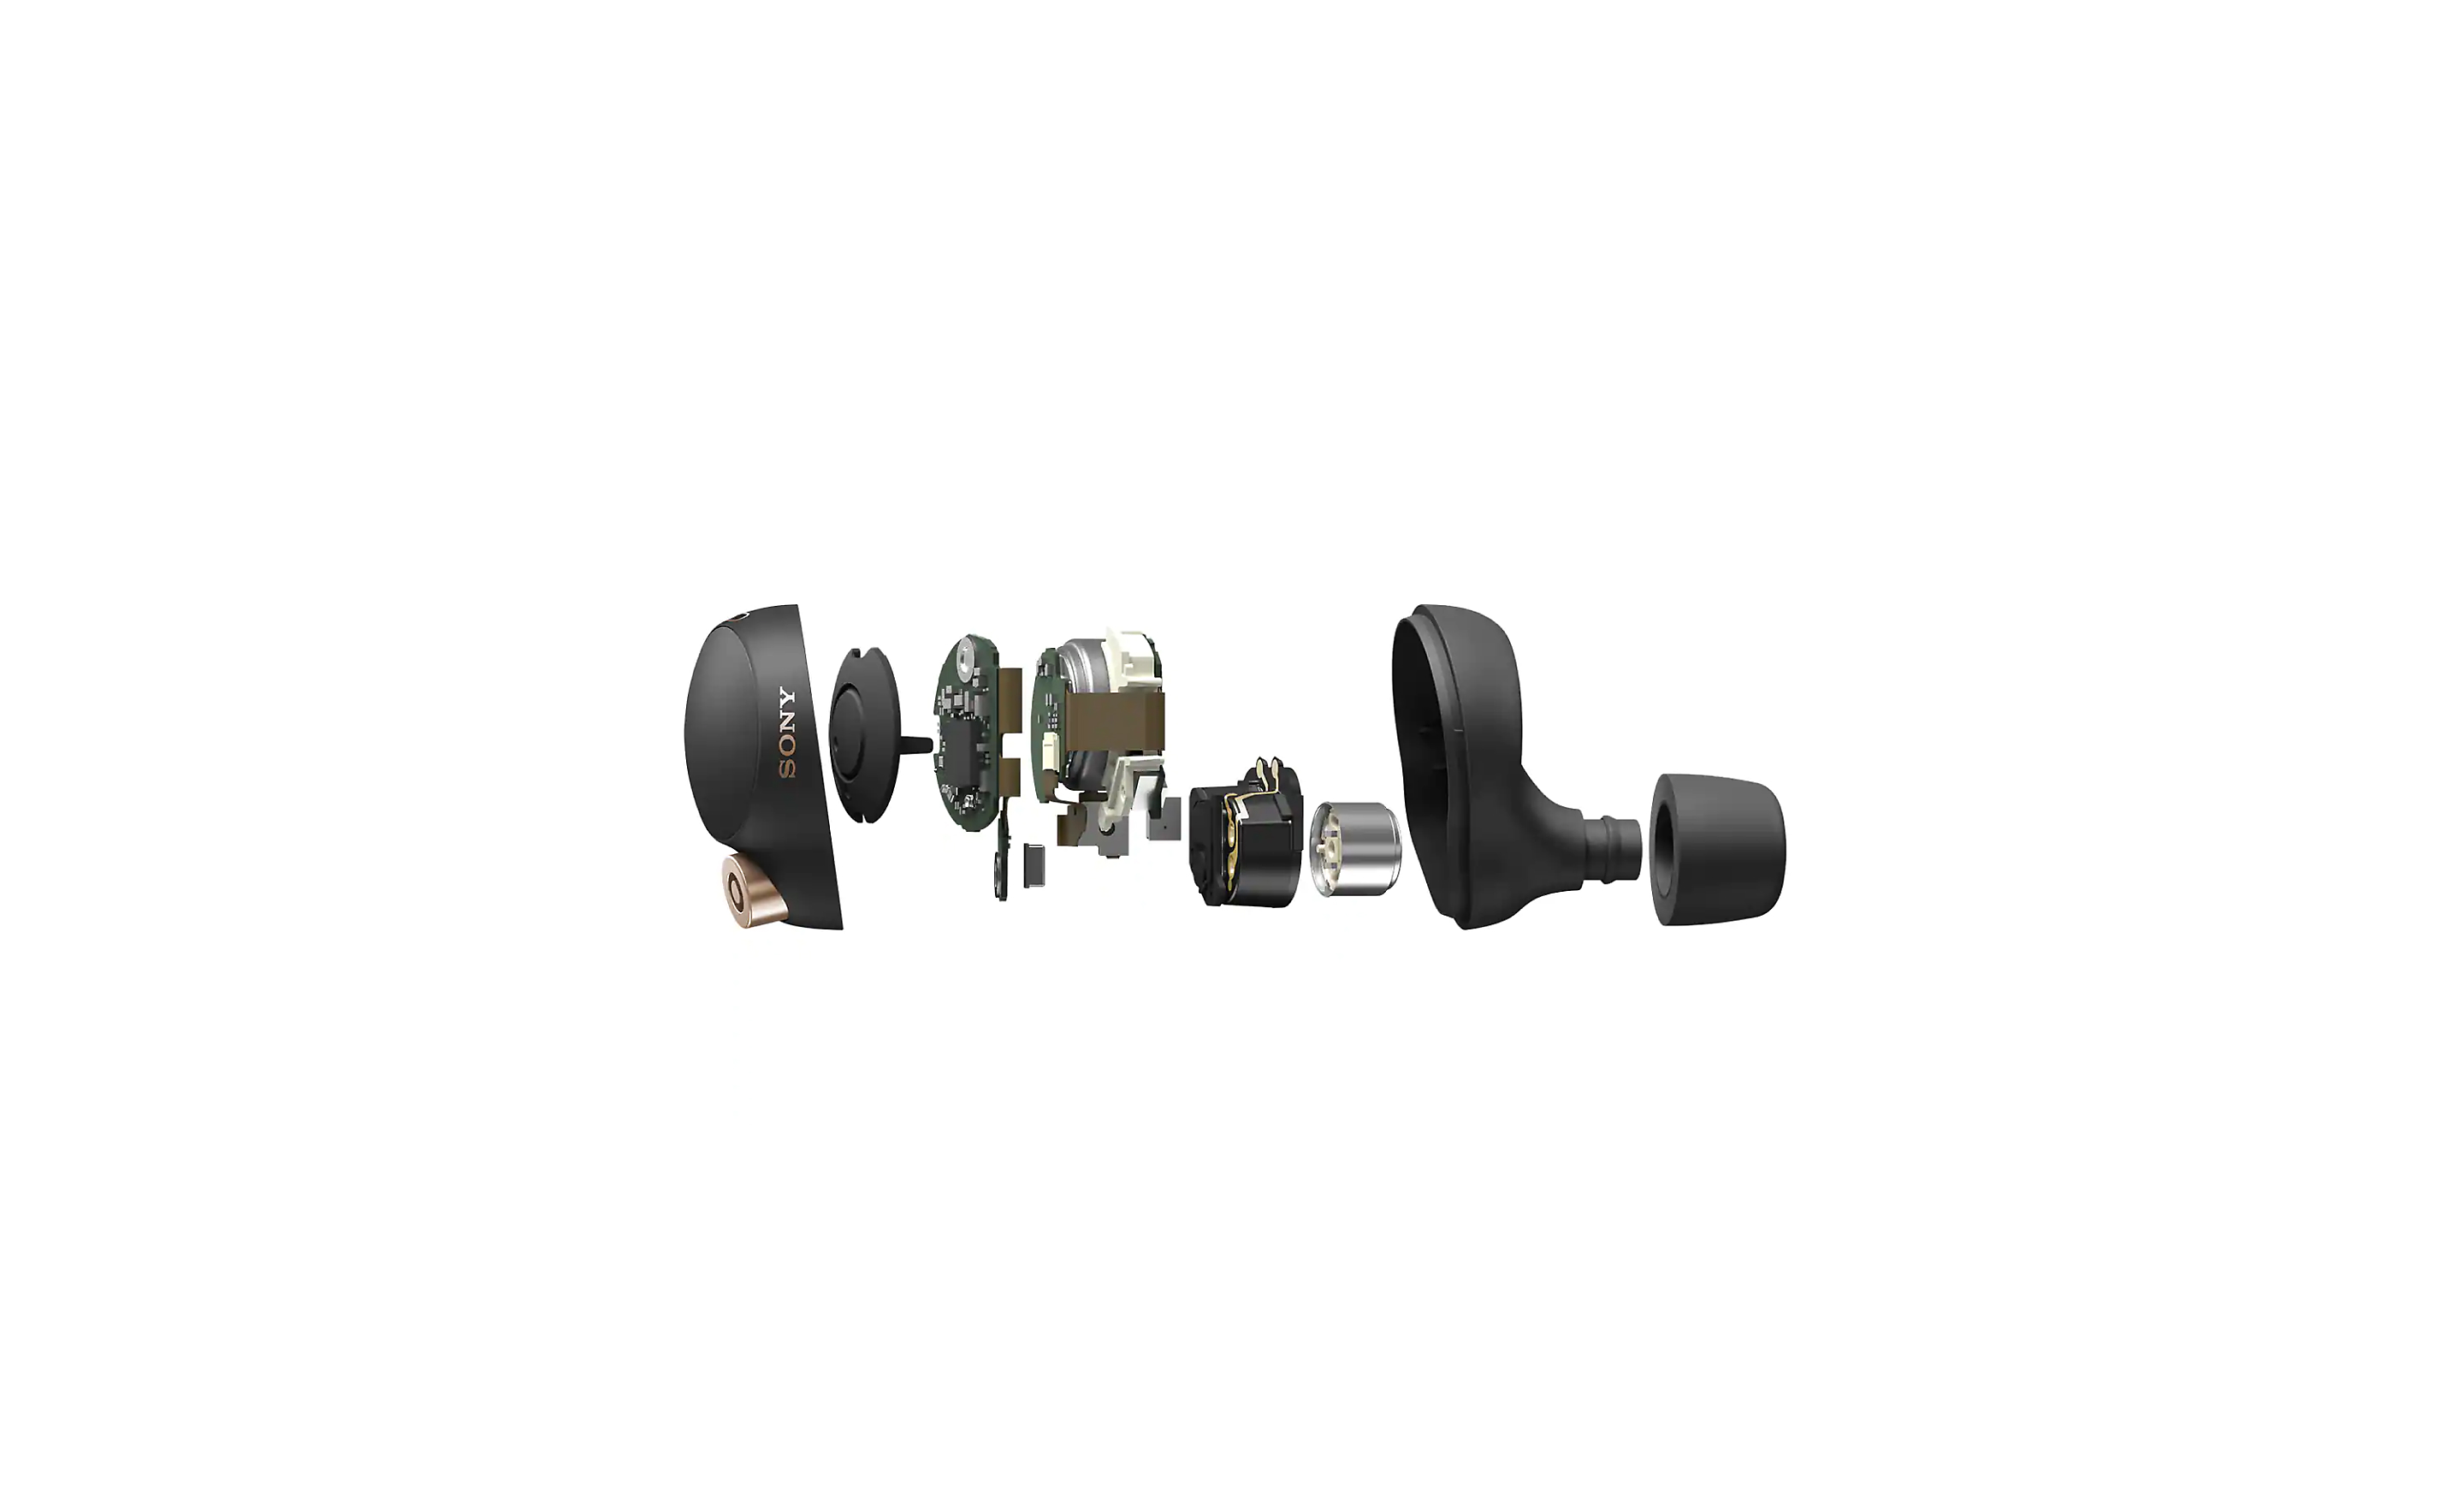 Exploded view of WF-1000XM4 headphones showing the internal components